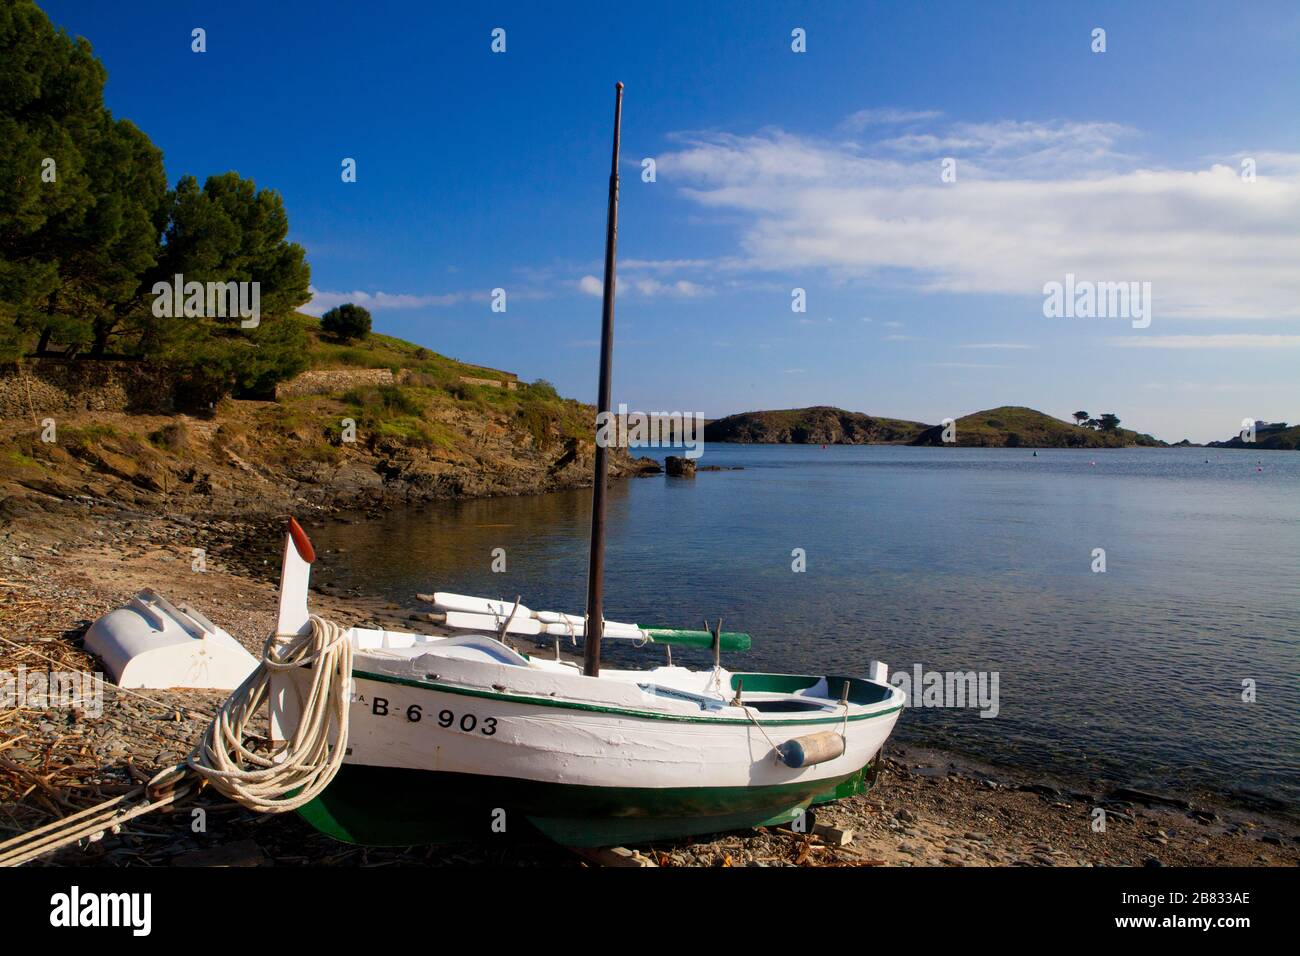 Some boats standing on the shore of Port Lligat village in Costa Brava, Girona, Spain. Stock Photo